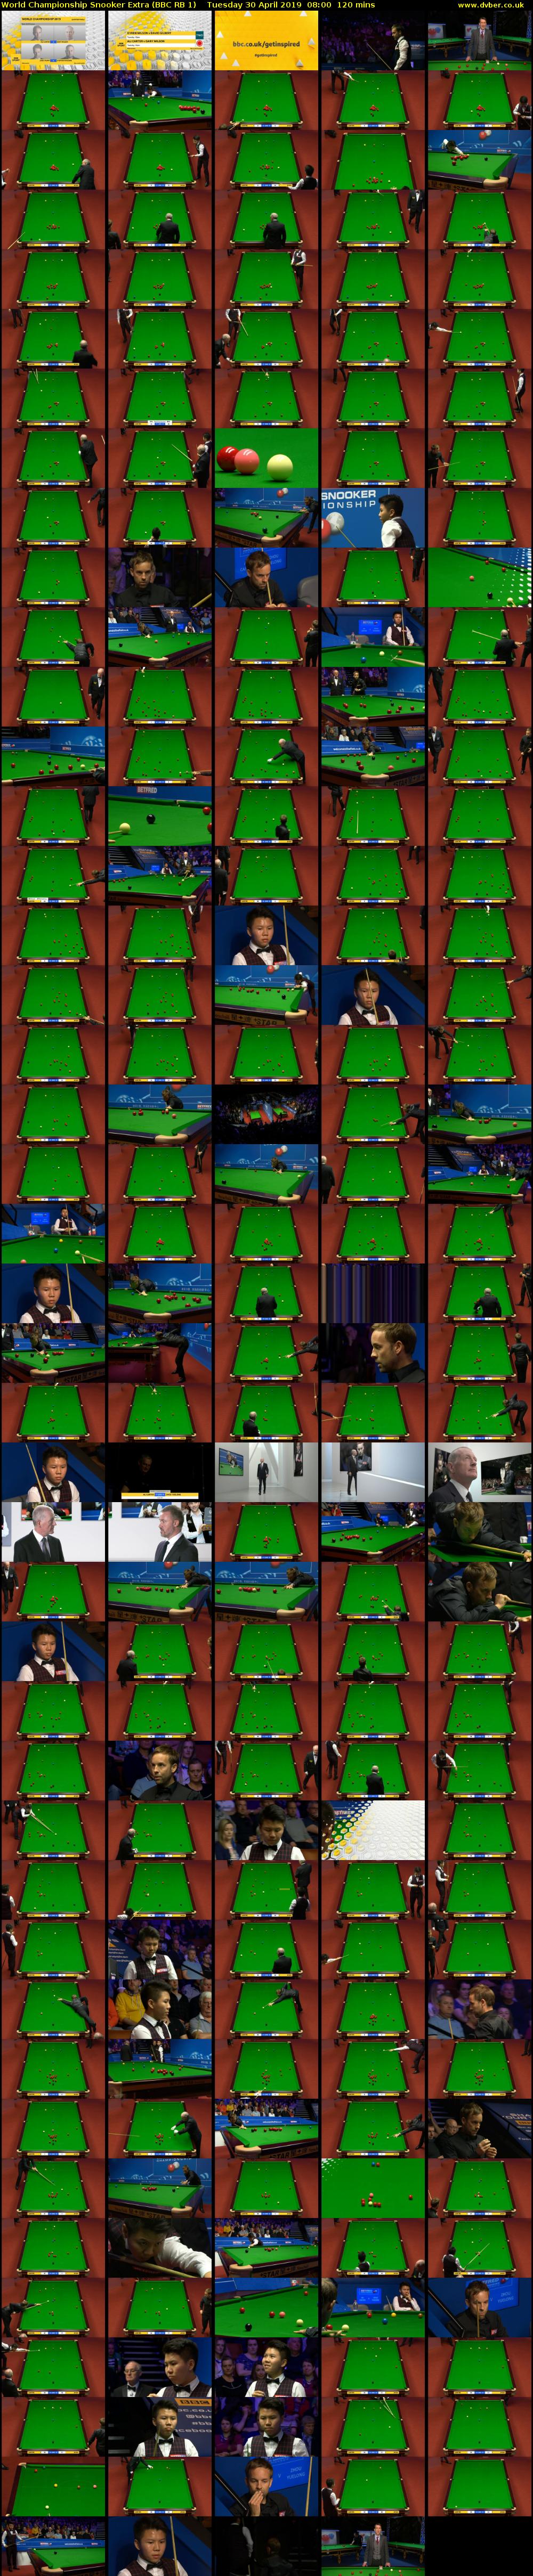 World Championship Snooker Extra (BBC RB 1) Tuesday 30 April 2019 08:00 - 10:00